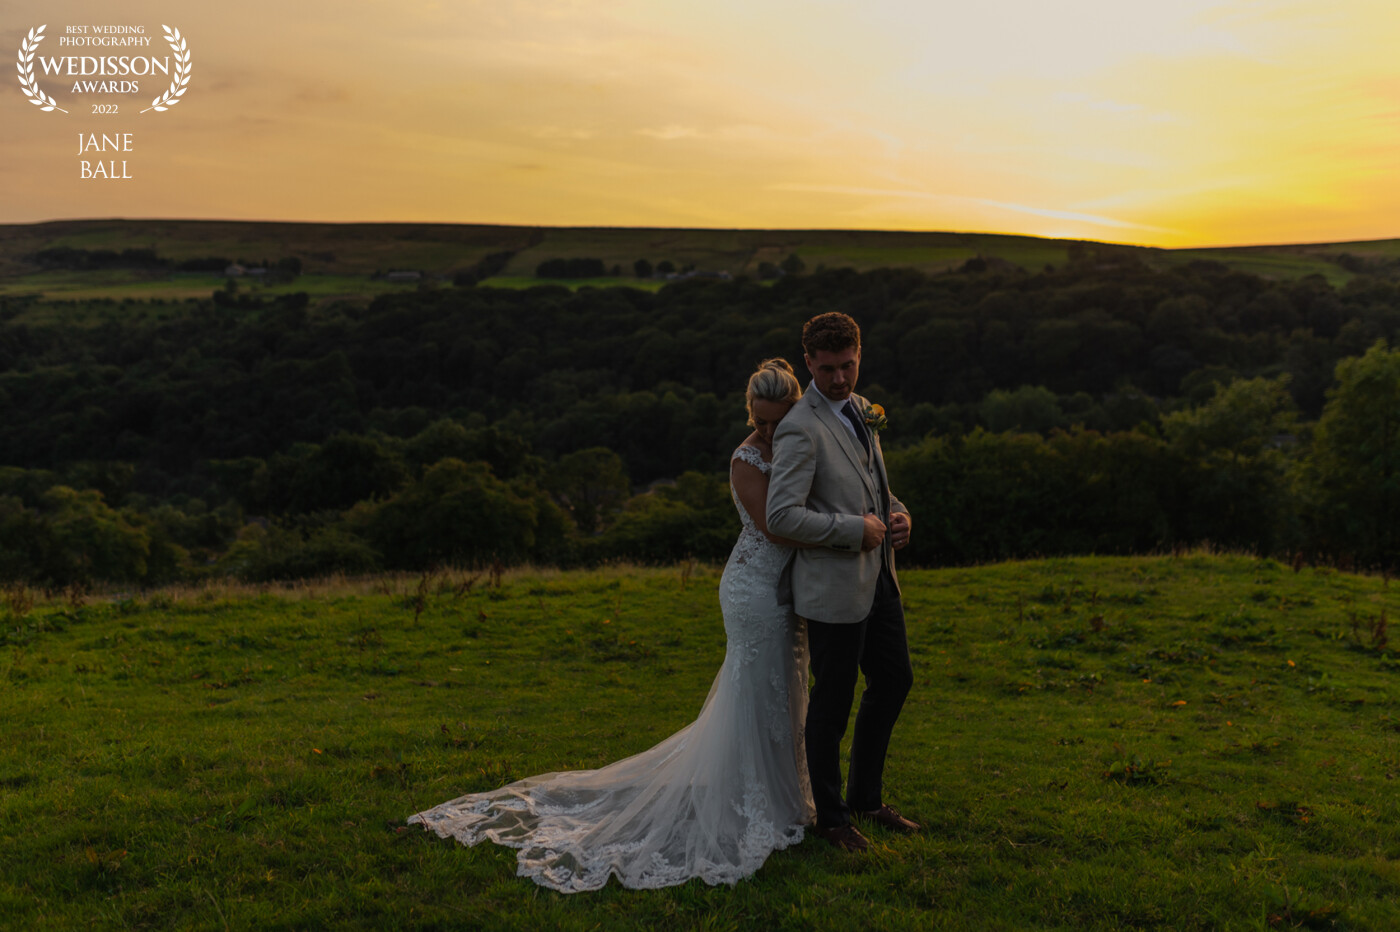 Alex and Nathan's wedding took place at their own home, a stunningly beautiful property in the heart of East Lancashire. They knew exactly how they wanted their romantic portraits to look so they chose the place that has the best views of the sunset and boy it didn't disappoint! There were so many gorgeous images of them it was really hard to choose which one to submit. In the end I chose this one because of how the setting sun caught the hem of Alex's dress, picking out the embellishments and making them shine like tiny diamonds.